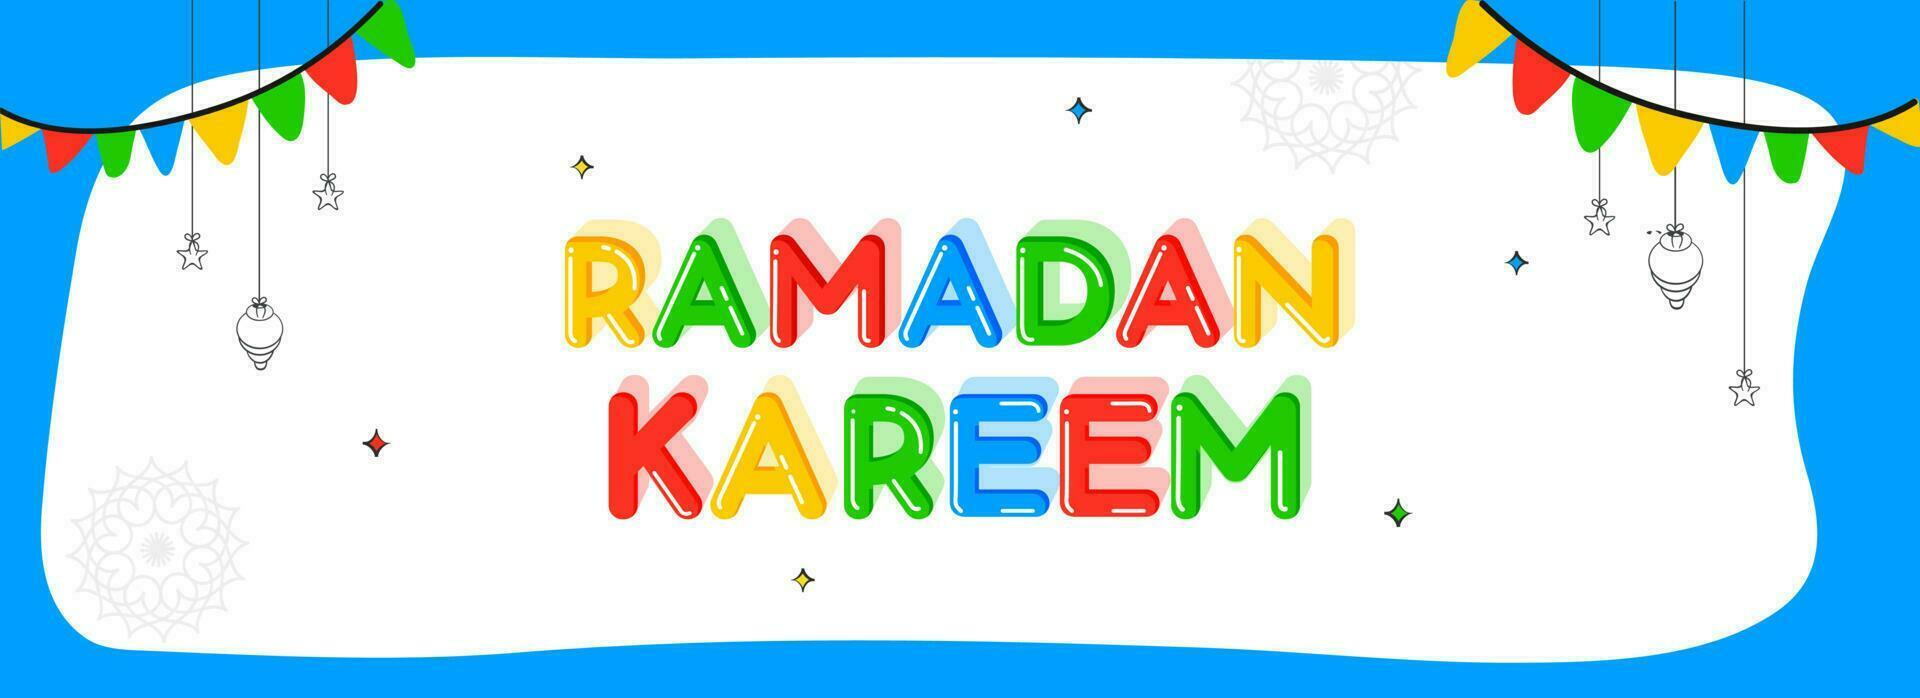 Colorful Ramadan Kareem Text With Doodle Stars, Lanterns Hang, Bunting Flags Decorated On White And Blue Background. vector